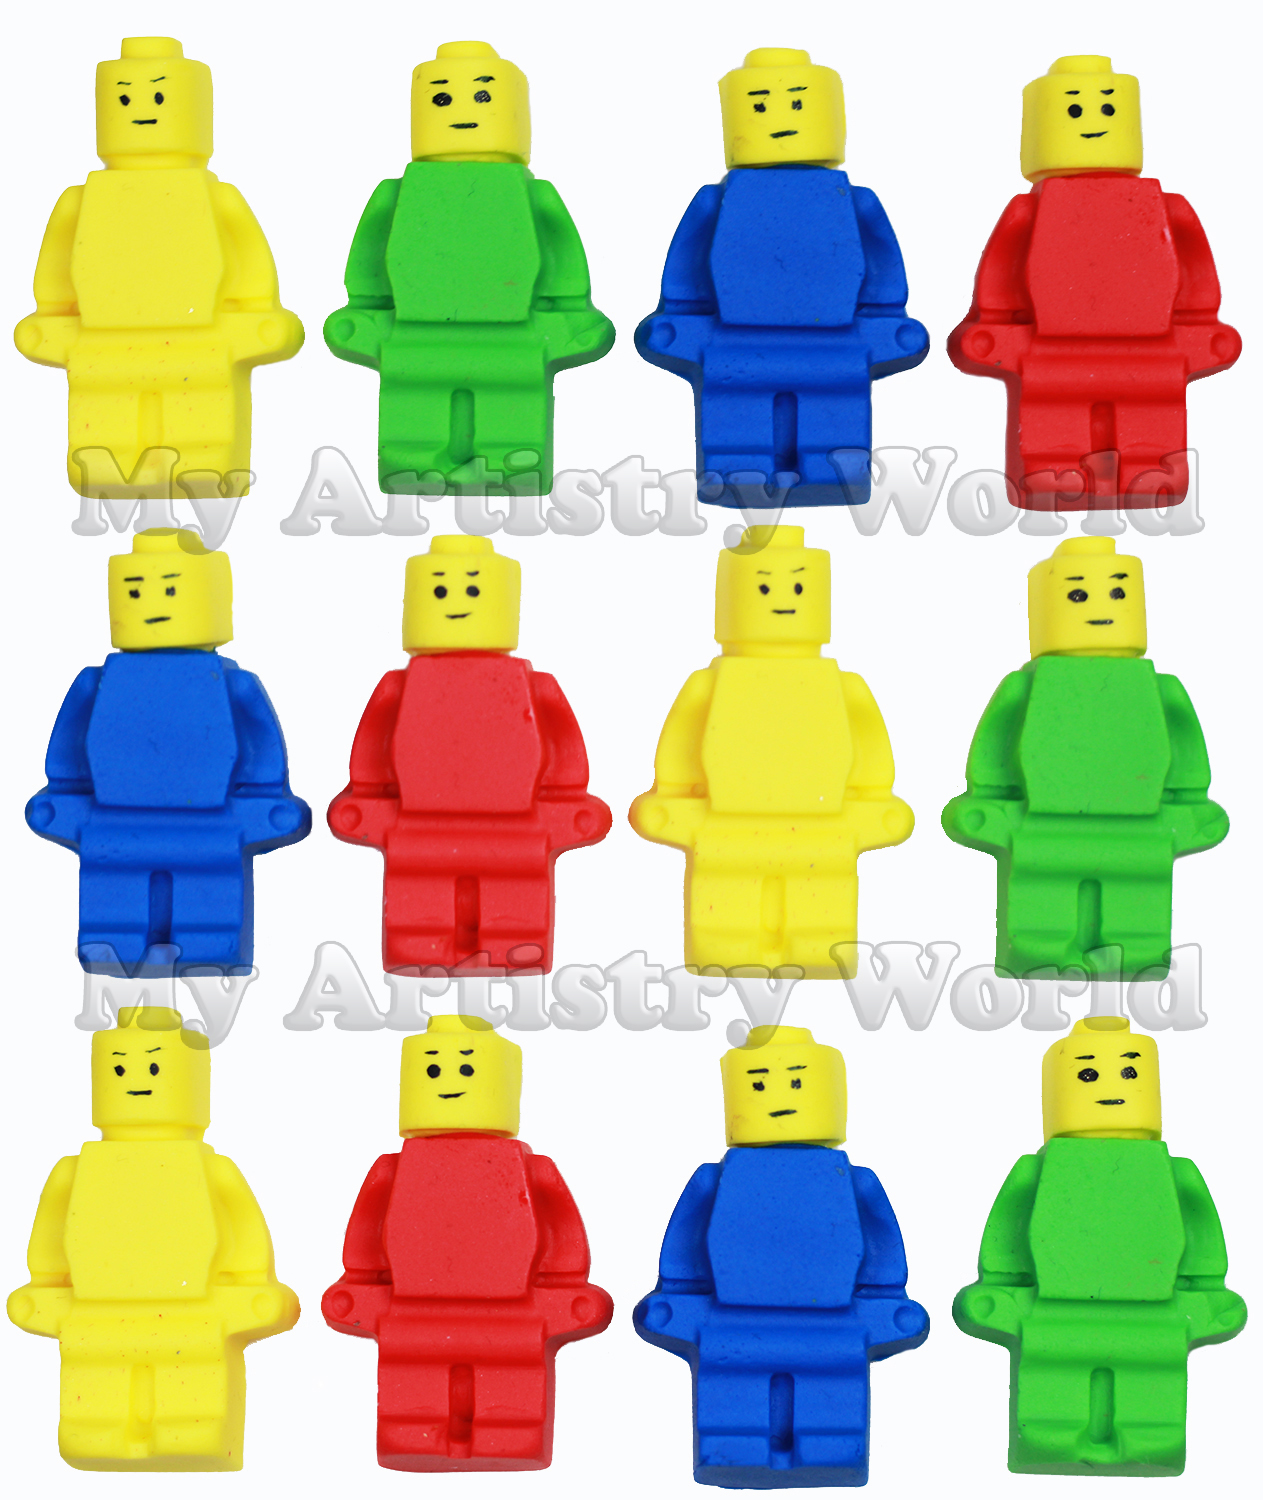 Lego Men cupcake toppers - My Artistry World